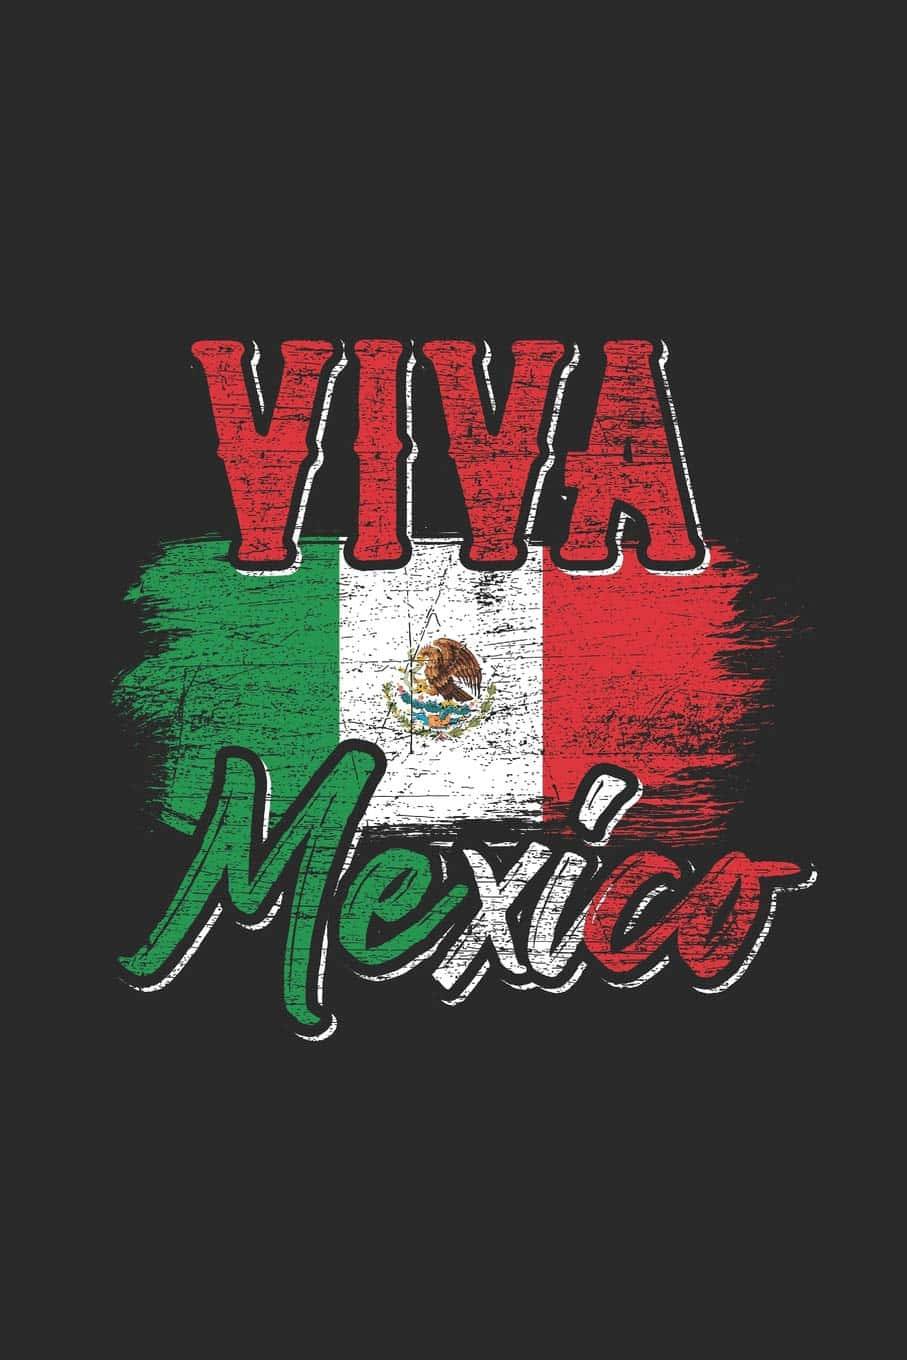 Explore The Vibrant Colors And Culture Of Viva Mexico! Background